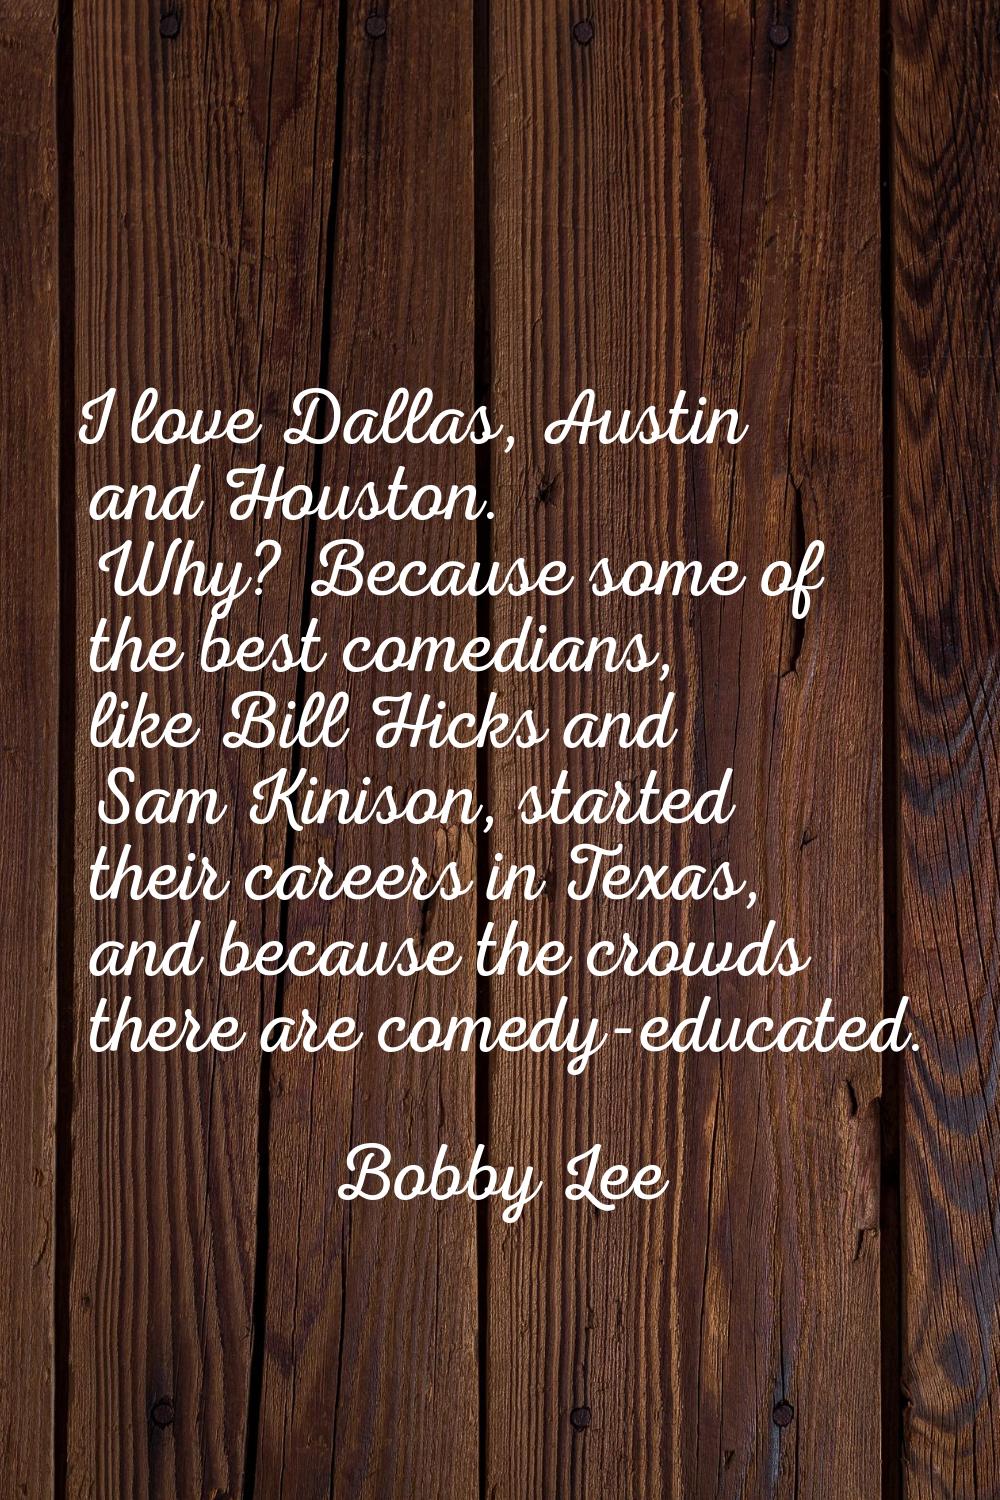 I love Dallas, Austin and Houston. Why? Because some of the best comedians, like Bill Hicks and Sam